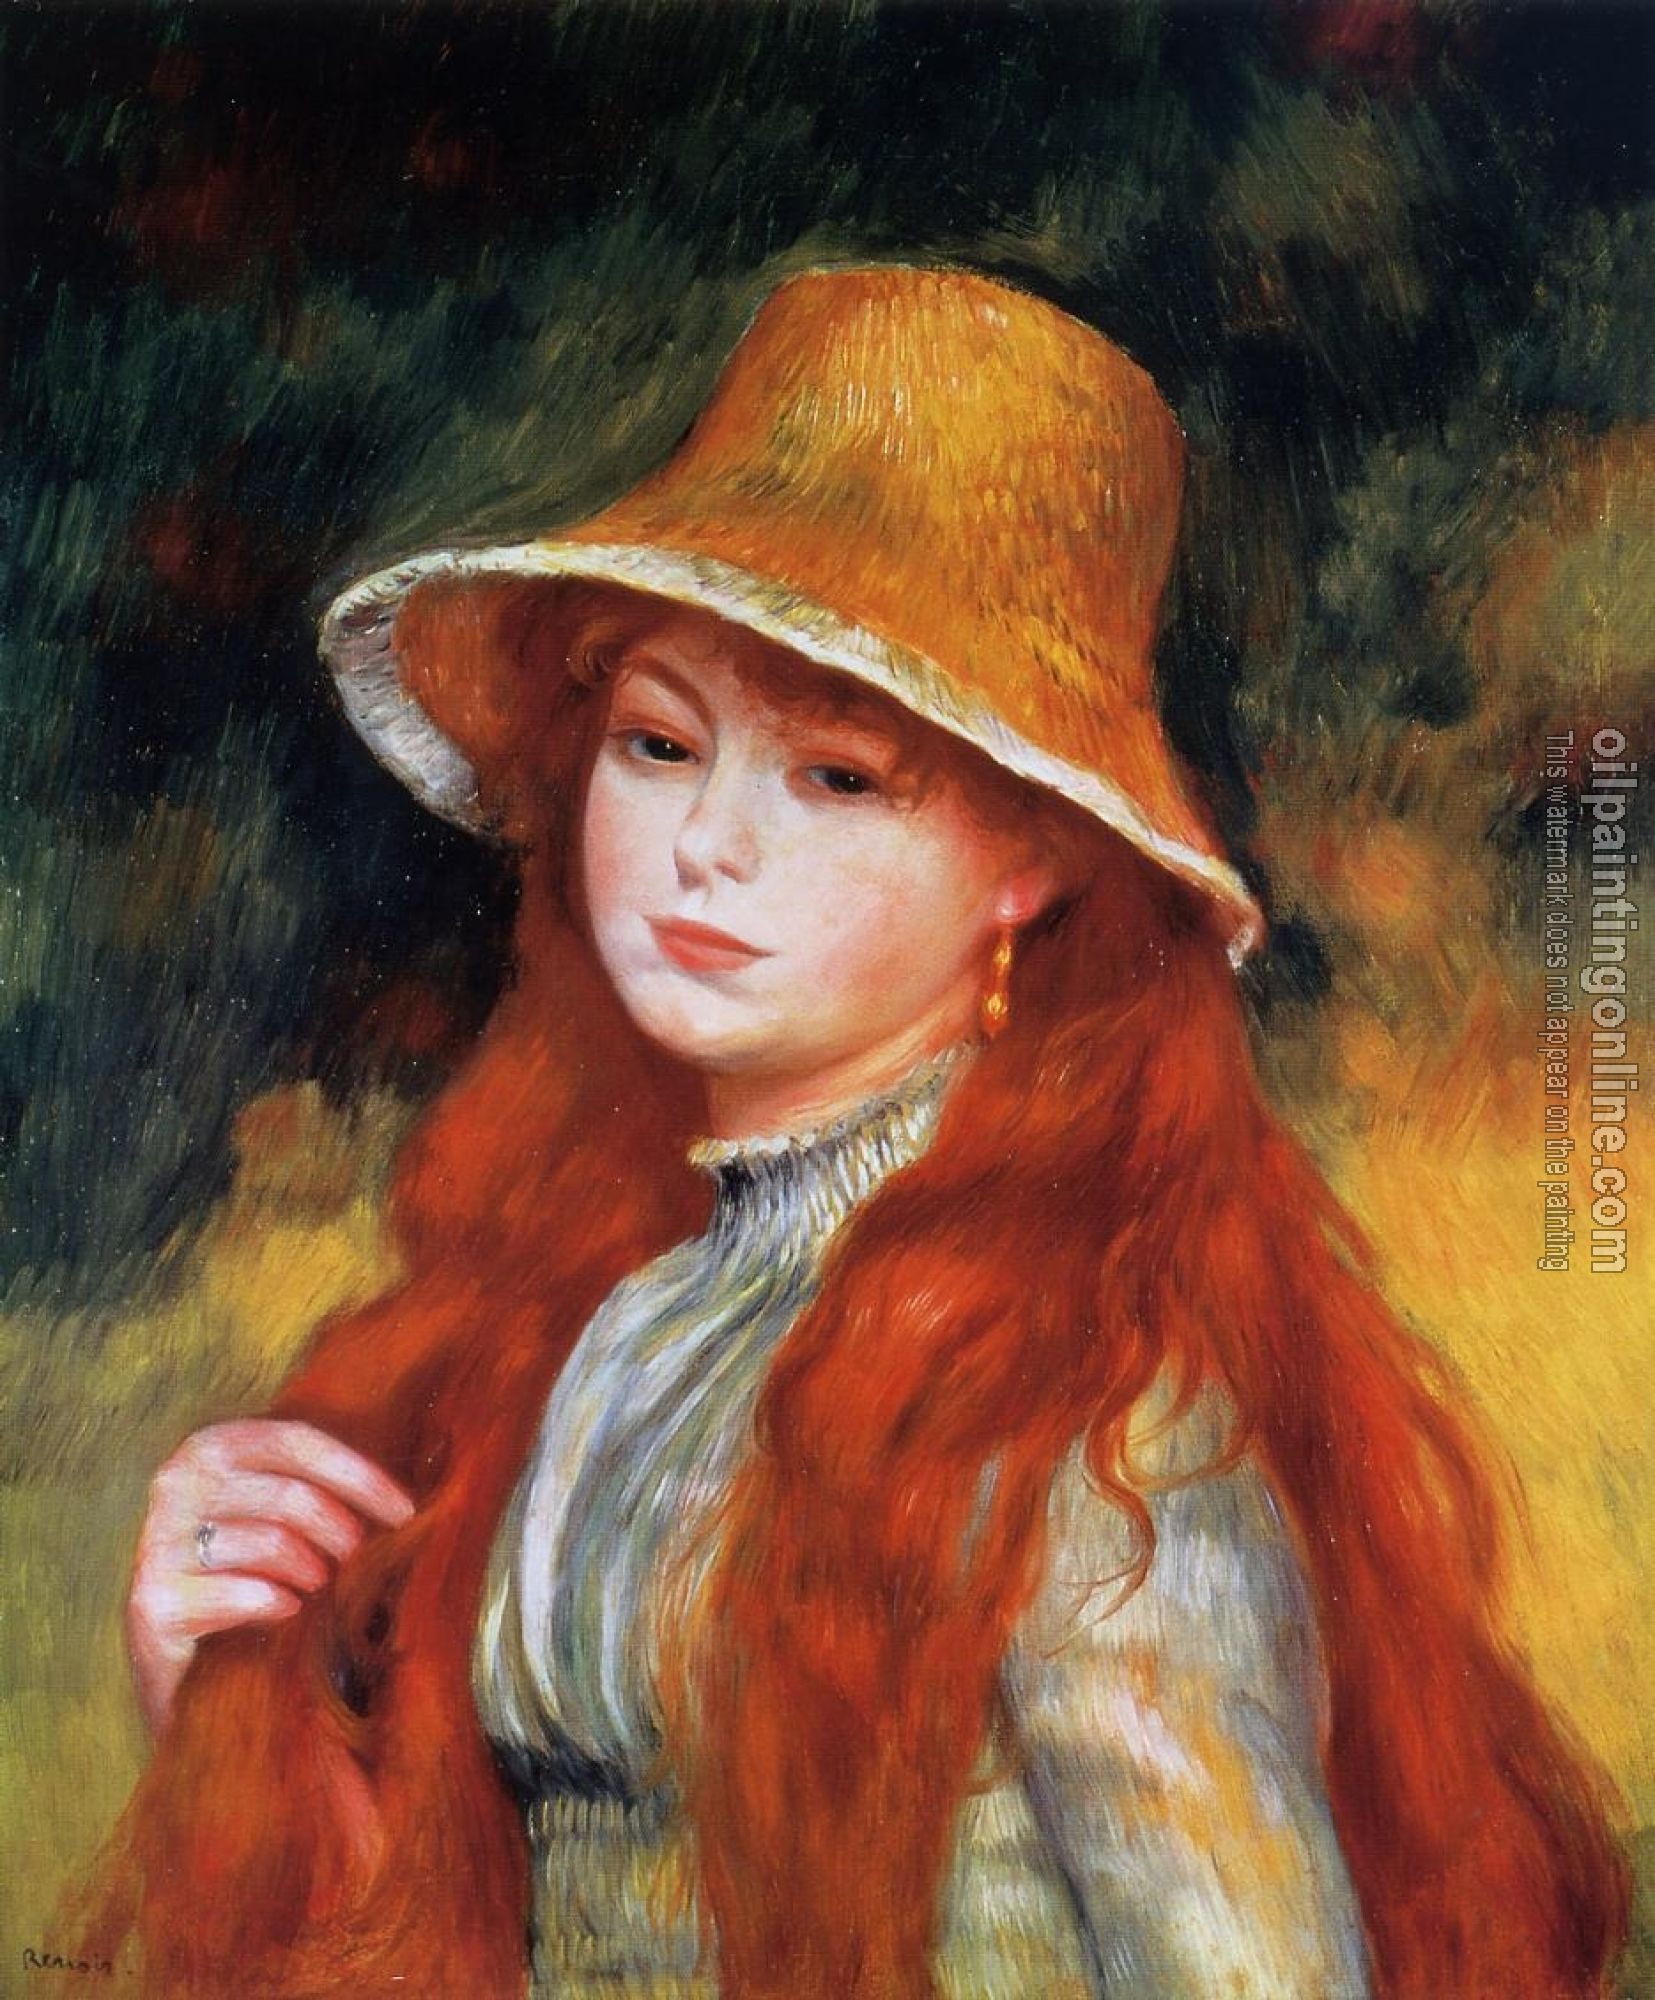 Renoir, Pierre Auguste - Young Girl in a Straw Hat